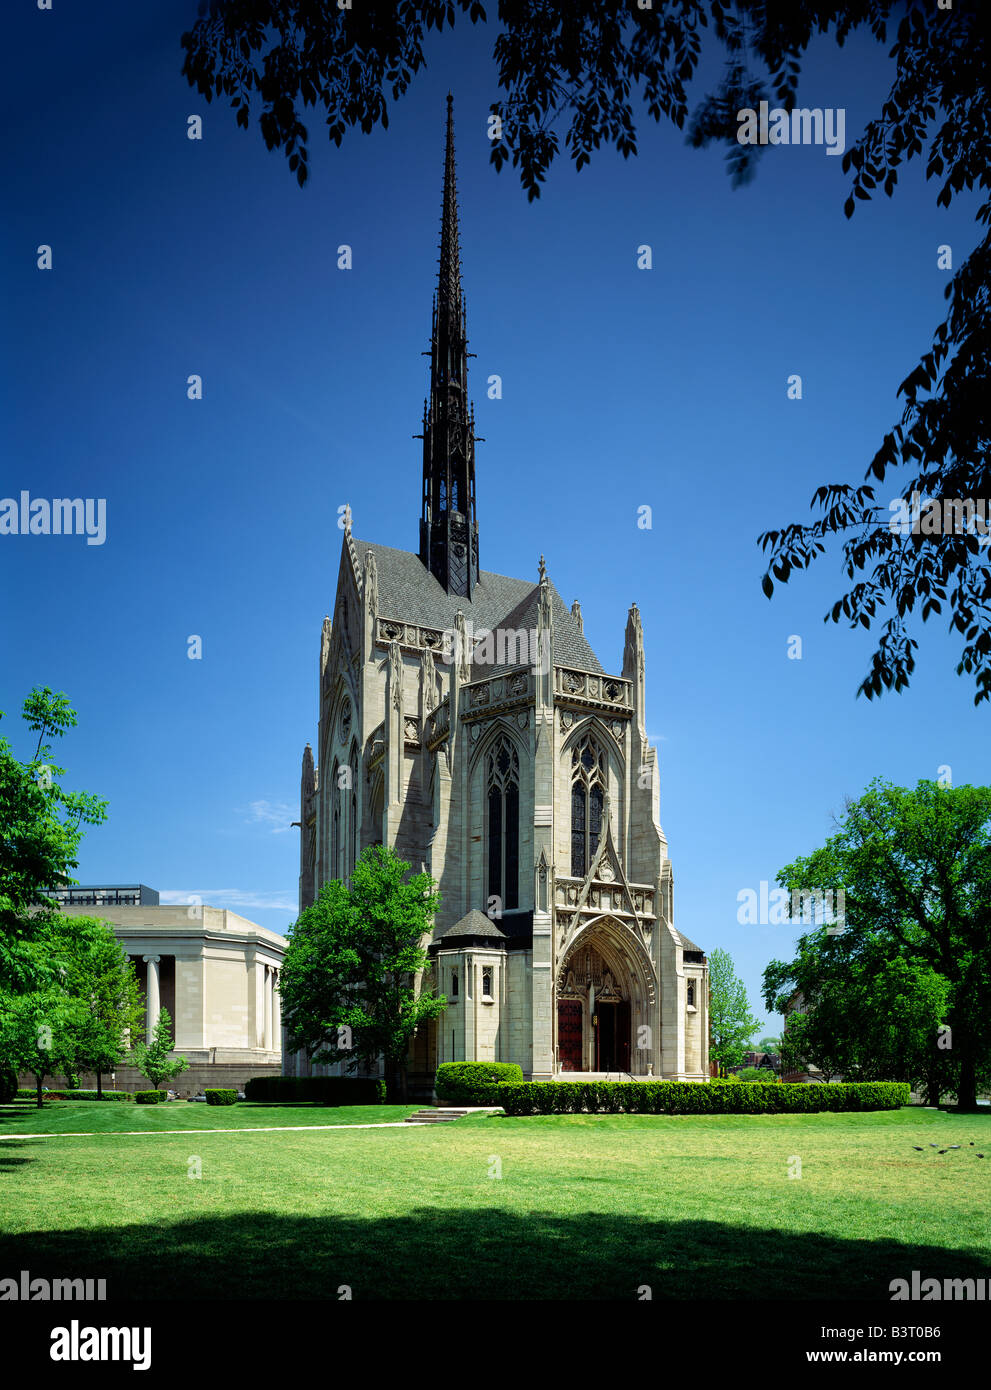 HEINZ MEMORIAL CHAPEL, UNIVERSITY OF PITTSBURGH; FRENCH GOTHIC ARCHITECTURE, PITTSBURGH, PENNSYLVANIA Stock Photo